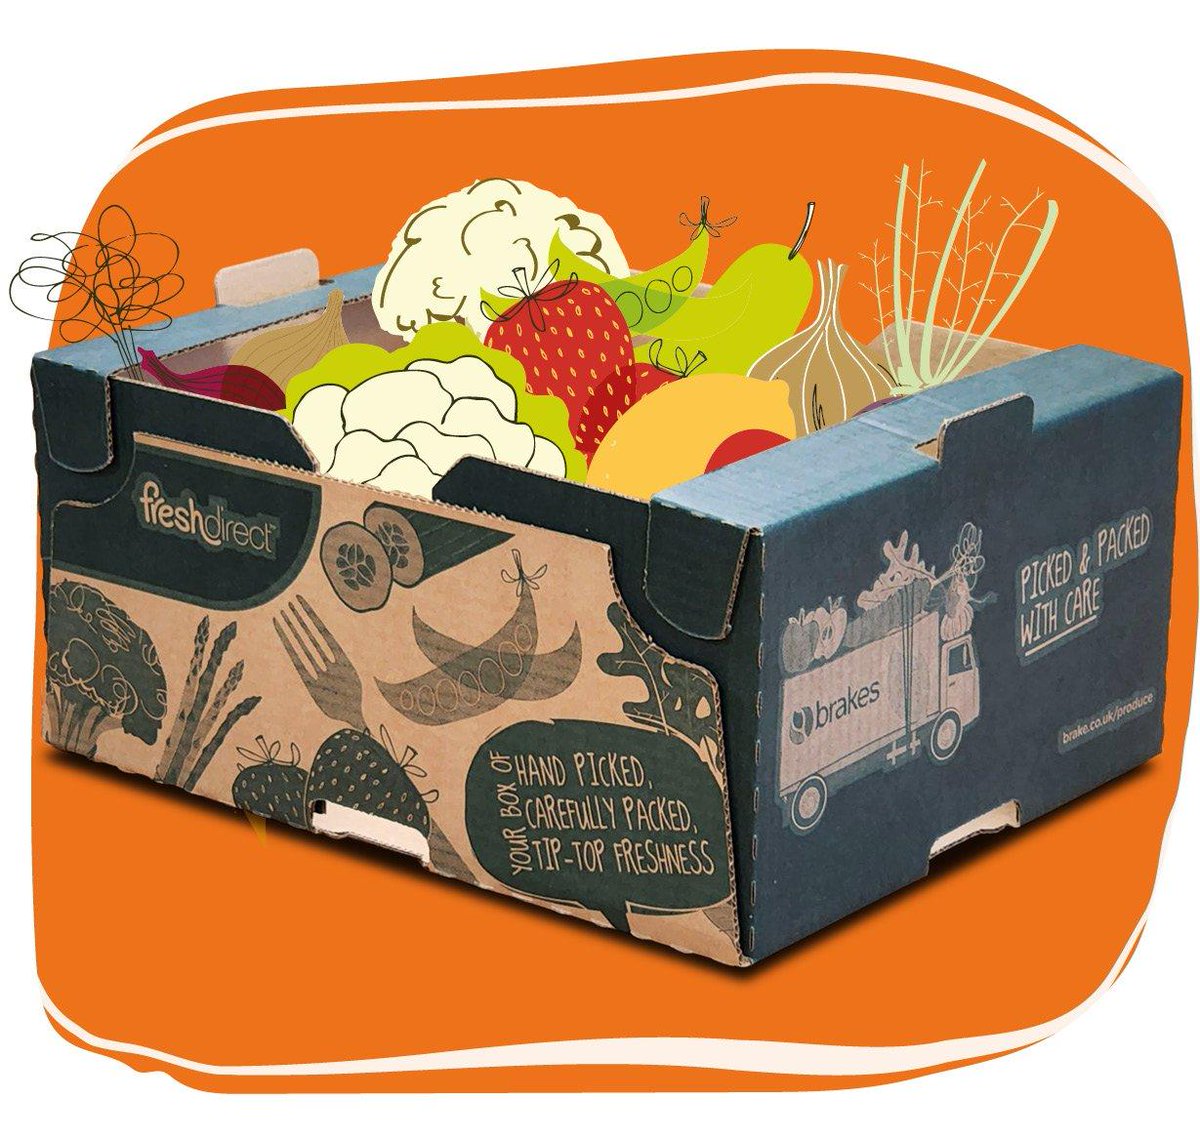 Did you know that the new @Brakes_Food @FreshDirectUK smaller buffet box Vs the previous box provides a 37% reduction in cardboard. This removes 5 tonnes of cardboard from our supply chain per week! 
#FreshFirst #KeepItFresh #sustainable #compostable #recycle #recyclablepackaging